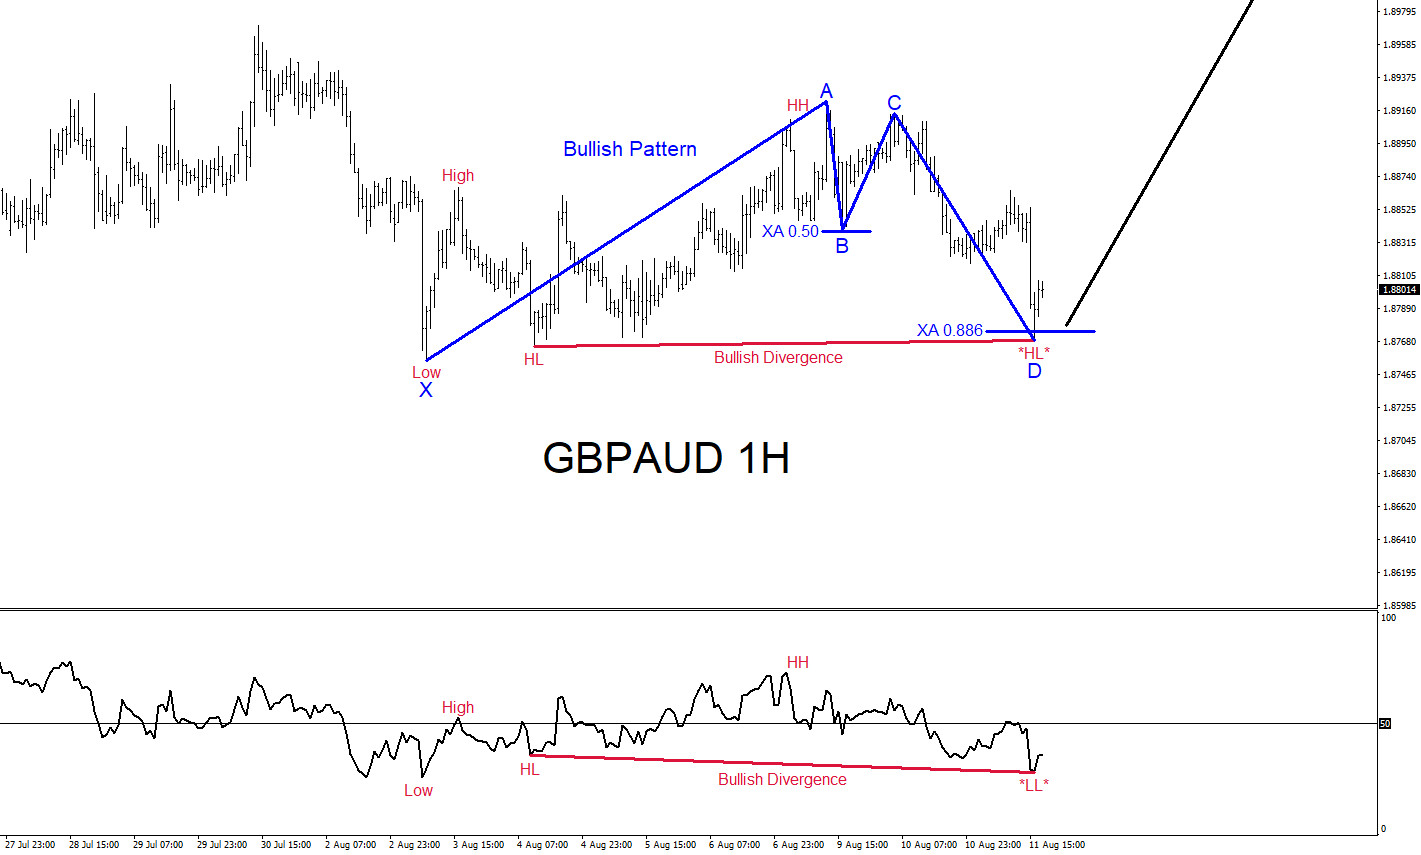 GBPAUD : Bullish Patterns Calling for Move Higher